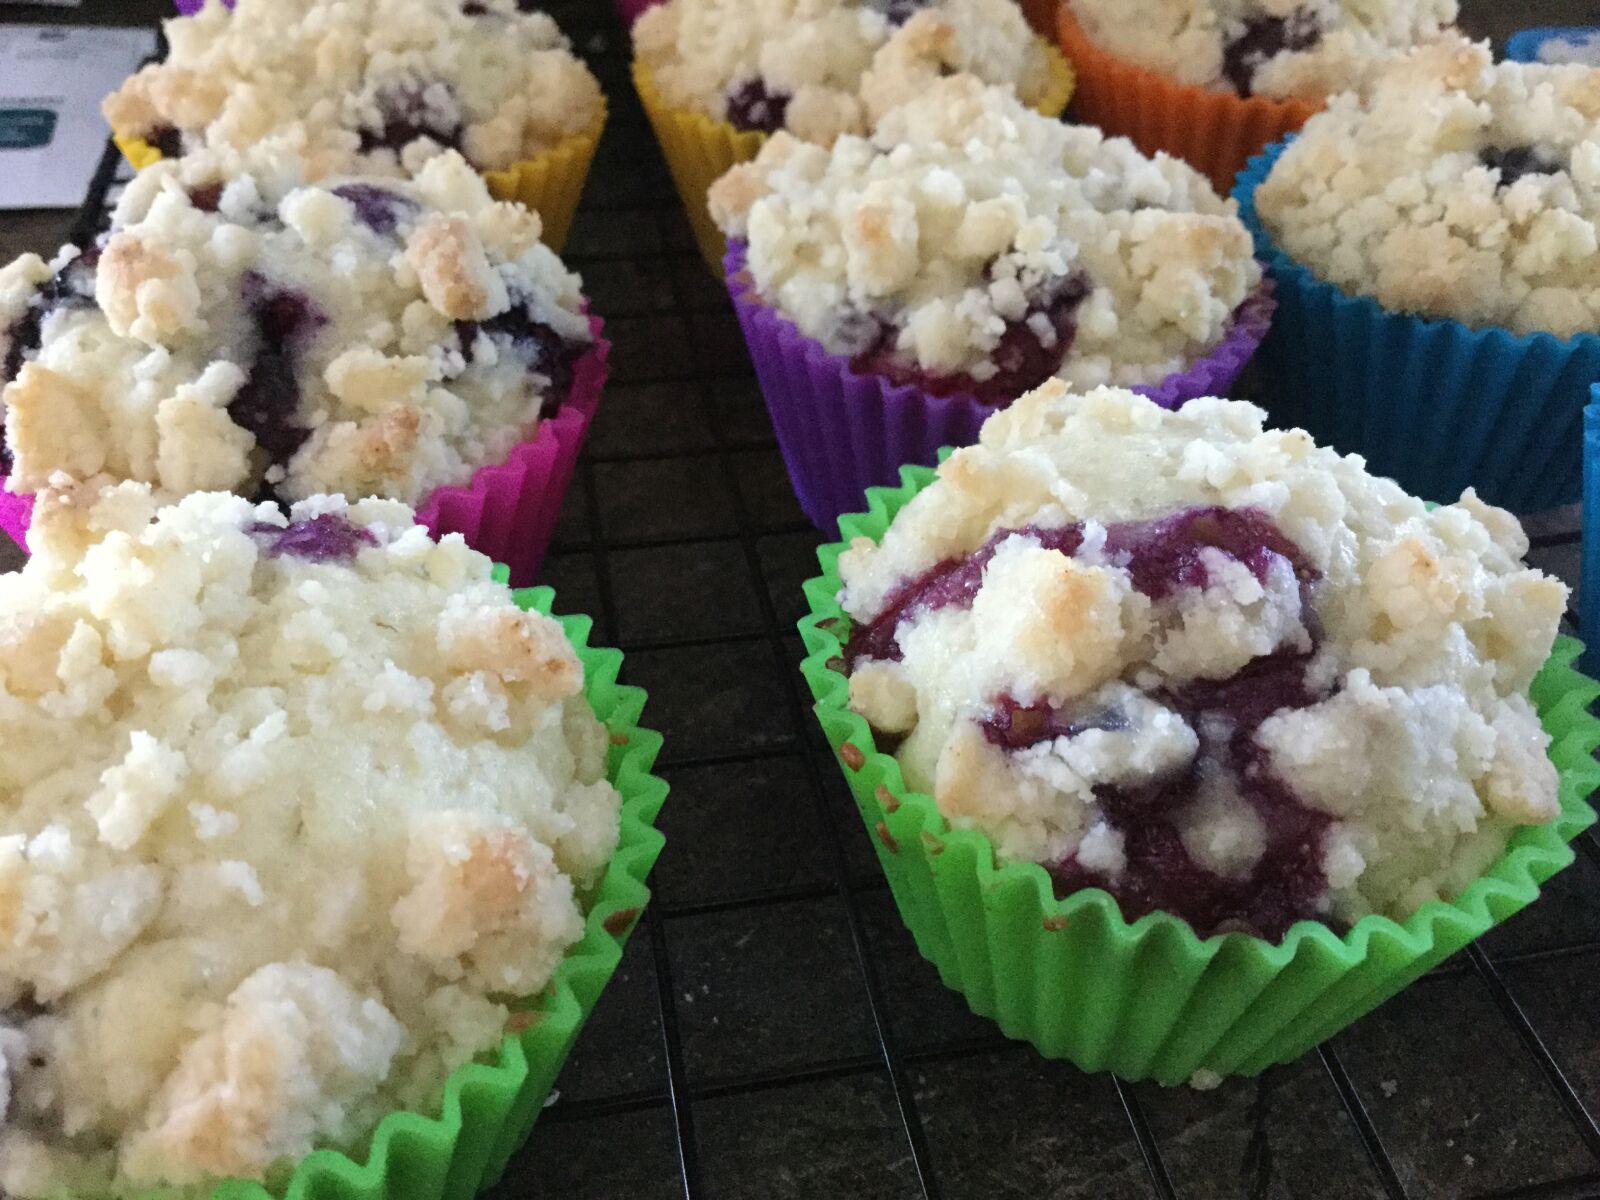 Apple iPad Air 2 sample photo. Blueberry, muffin, muffins photography